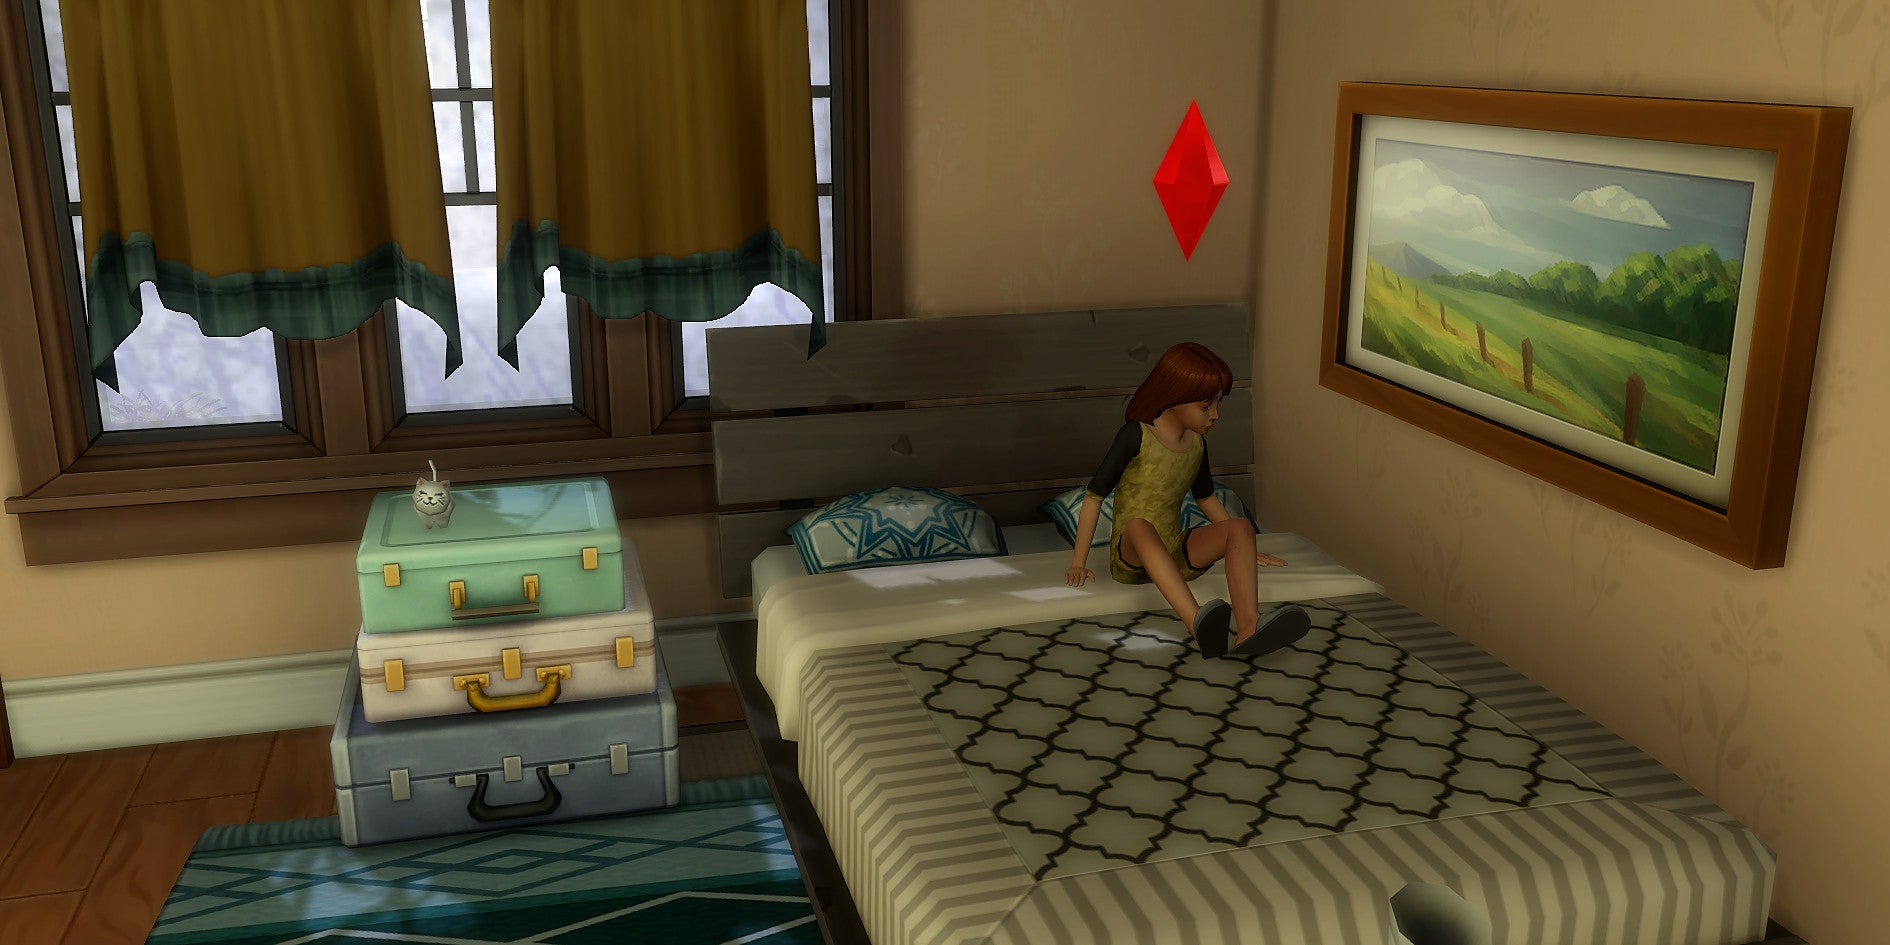 A Sim scoots over in bed in The Sims 4.